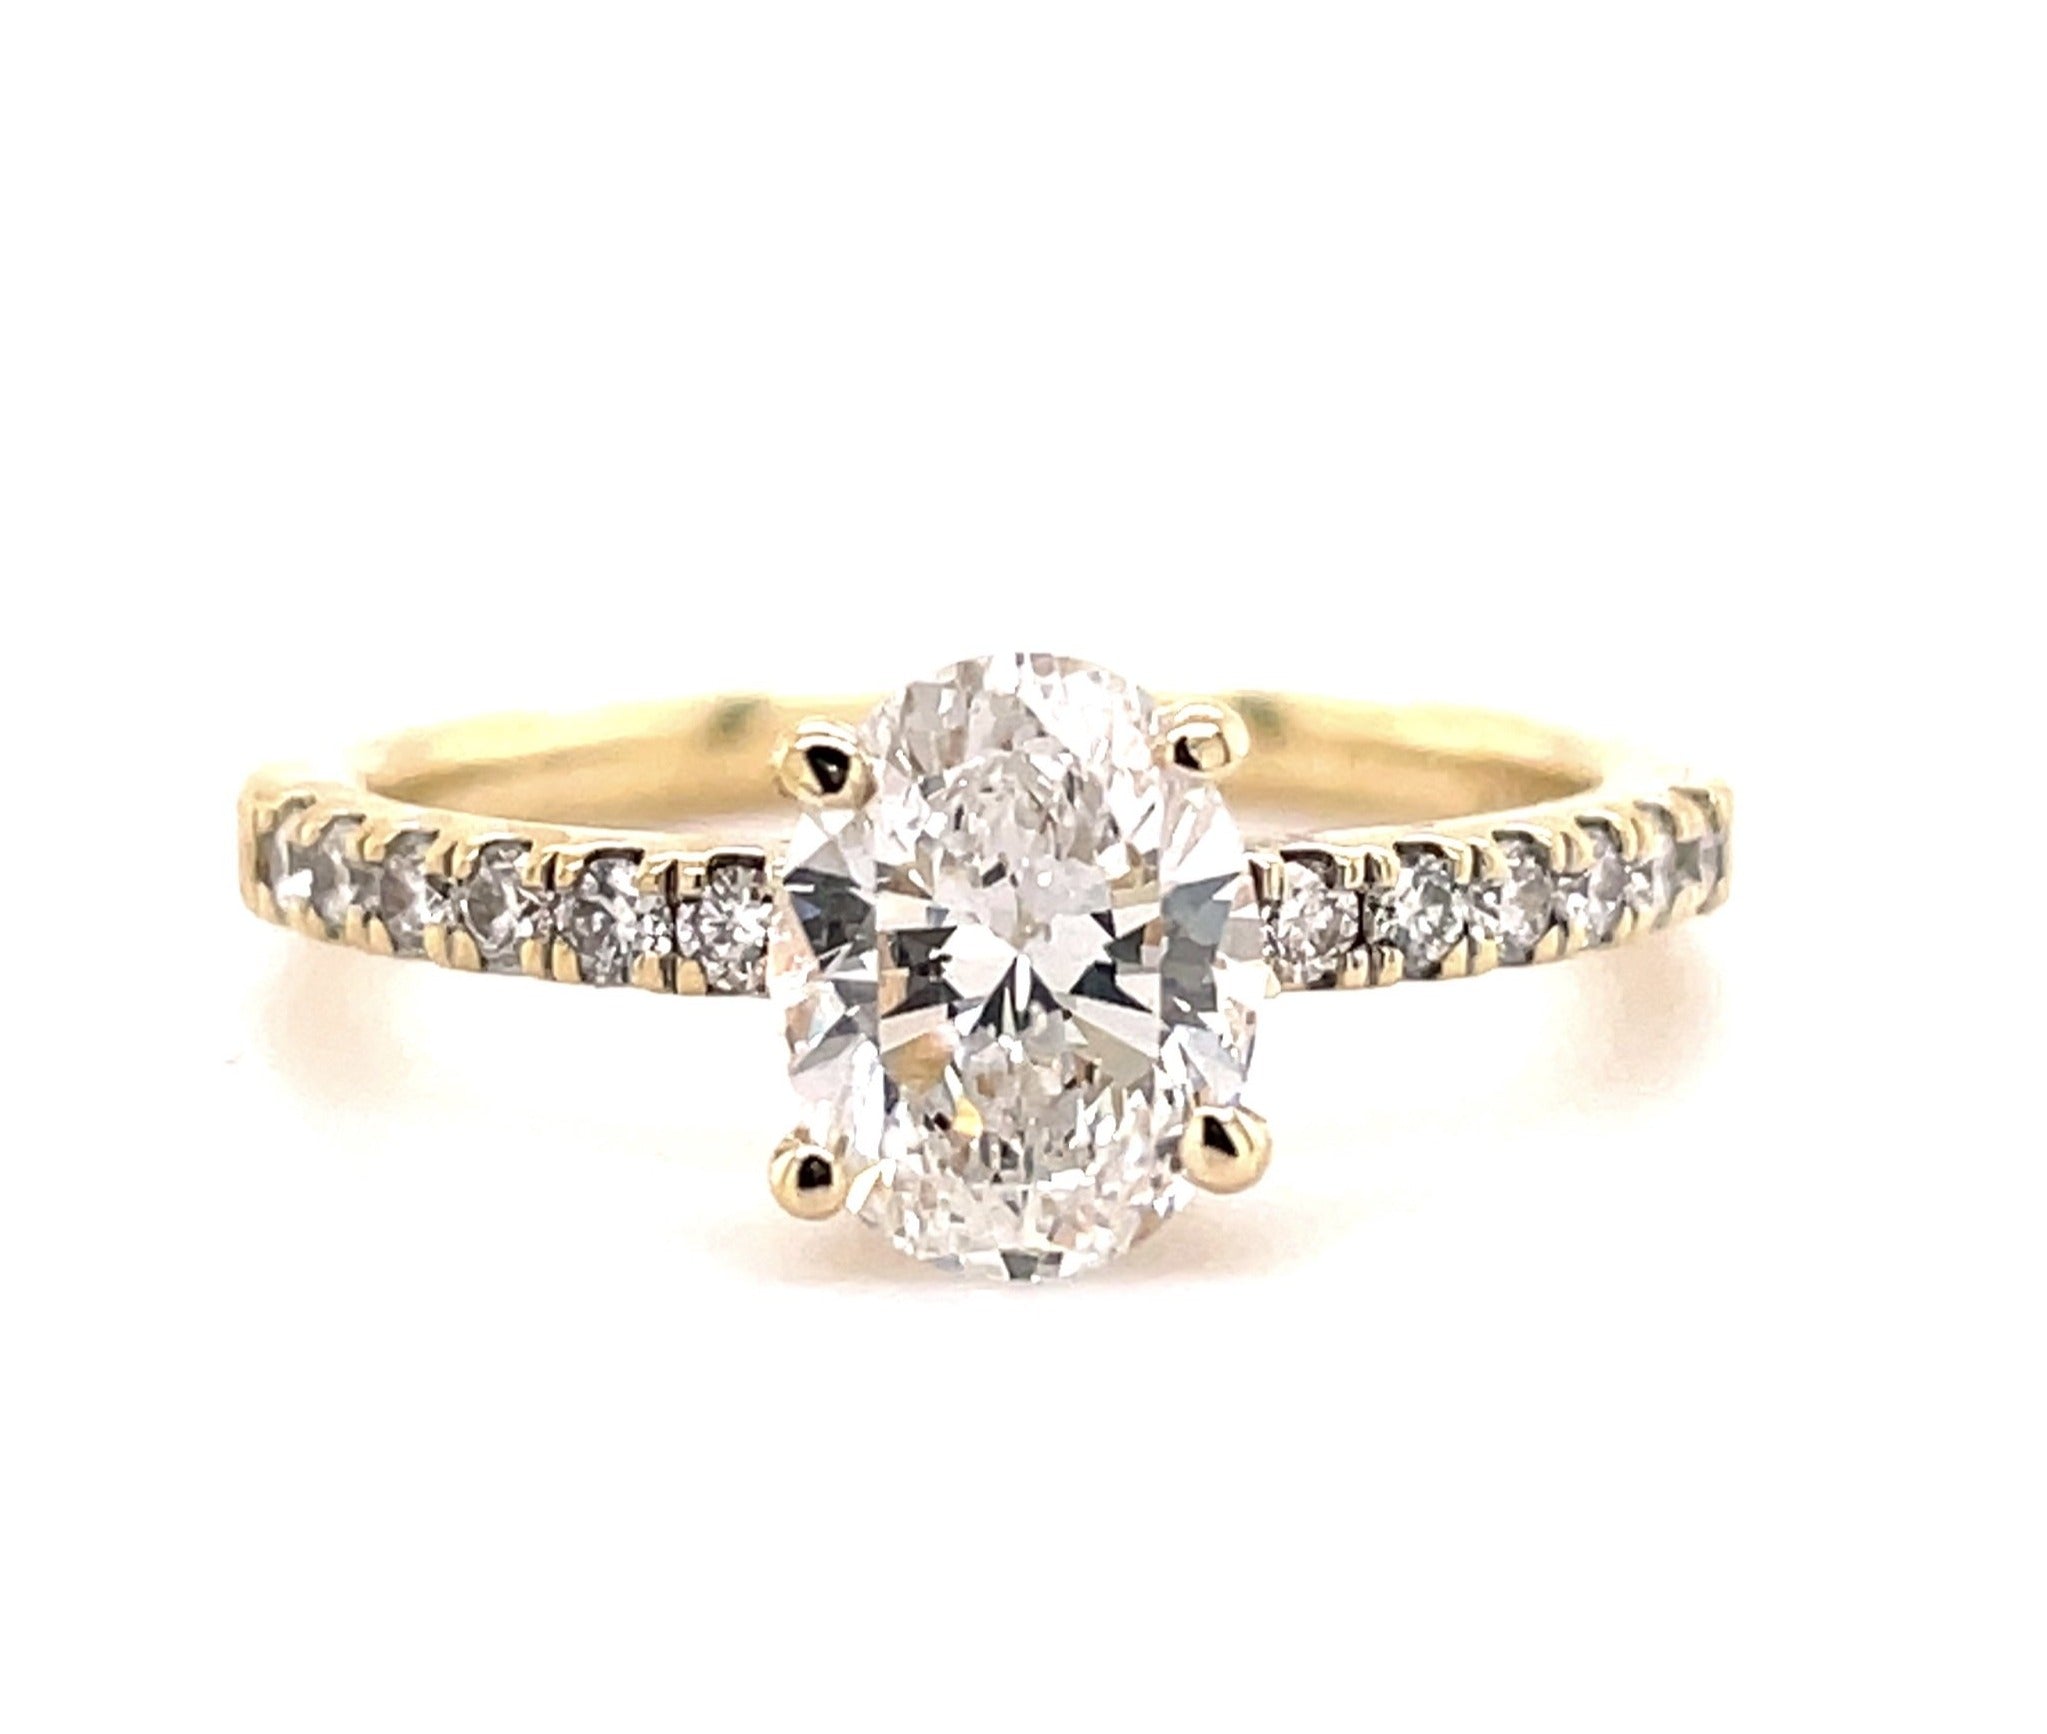 A delicate and modern oval cut diamond glitters with the illusion of a bigger size, making 0.93 cts, Color F/G and Clarity SI1 beautiful and eye-catching. Set in a four-prong mounting of 14k yellow gold with an entrancing diamond band of 0.28 cts, this Custom Made Oval Cut Engagement Ring is simply divine!